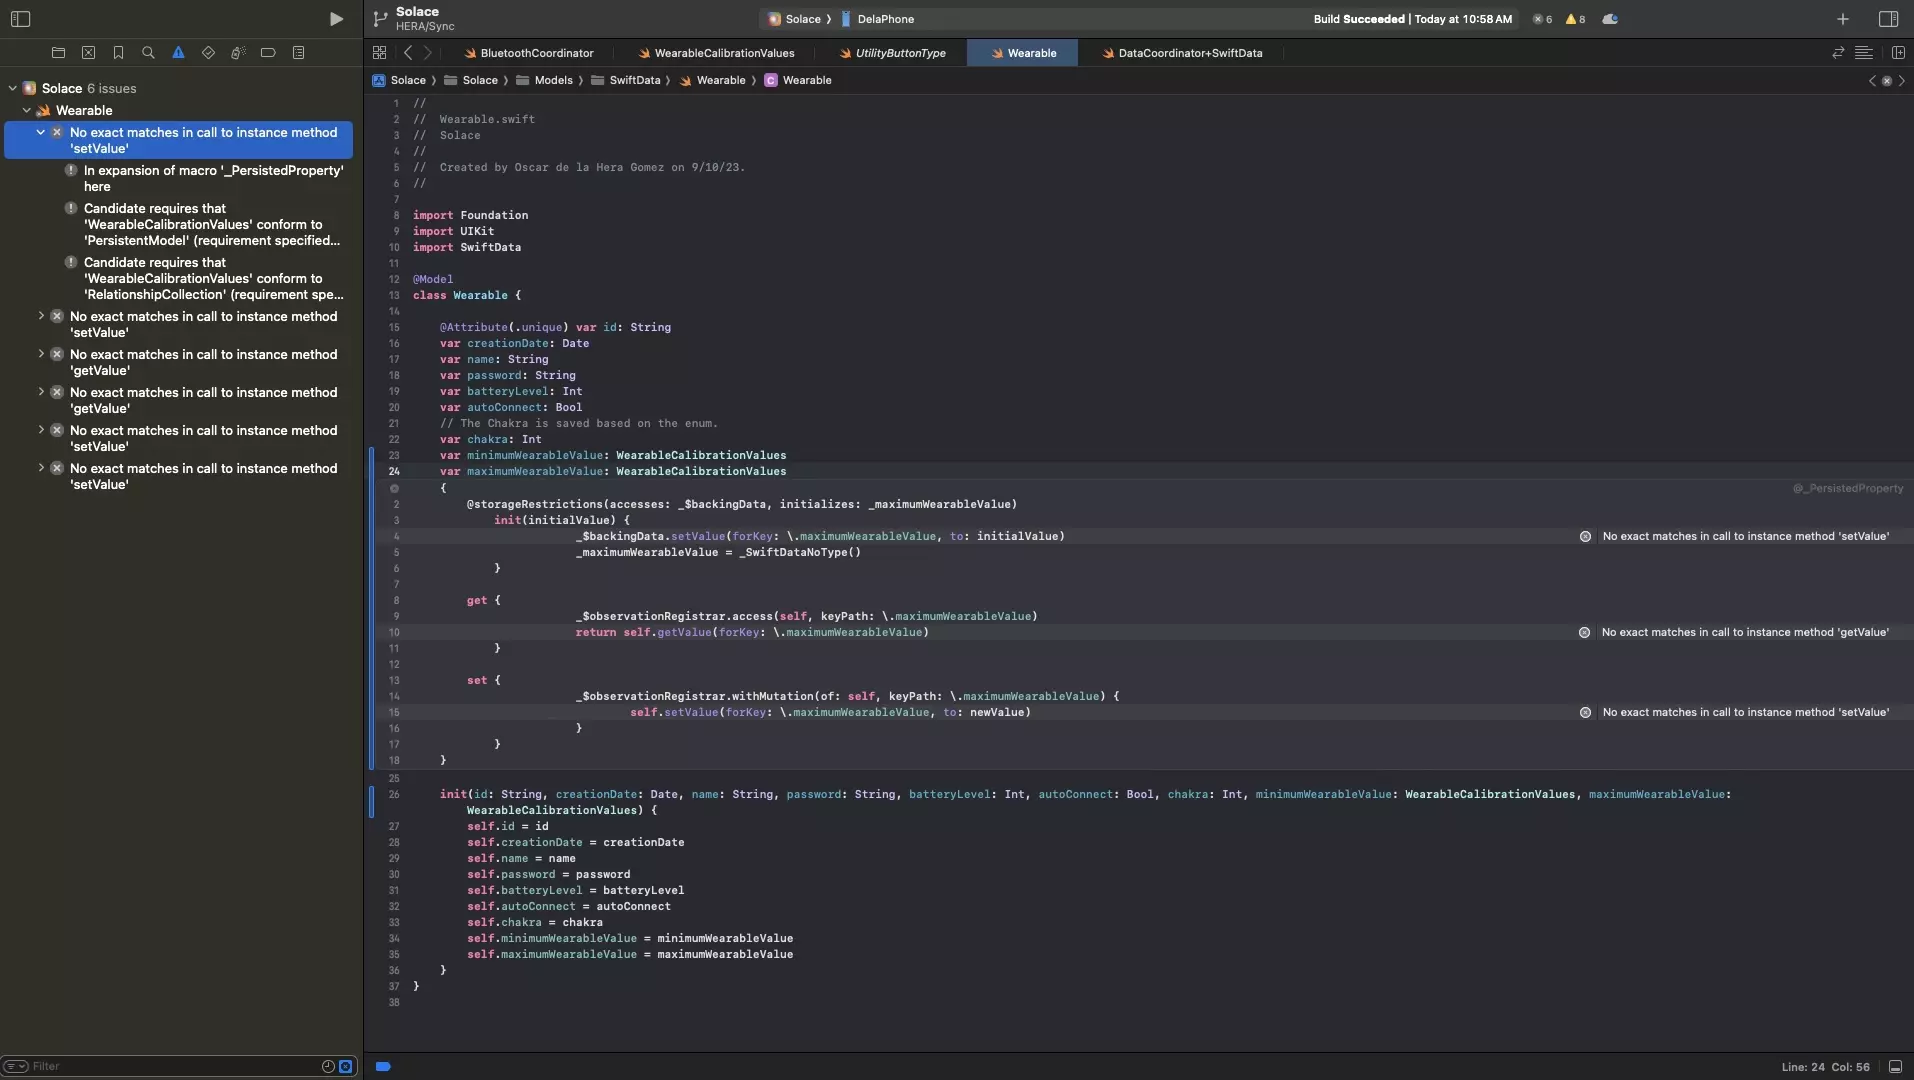 A screenshot of Xcode showing how a build failed when adding a complex value to a SwiftData model.